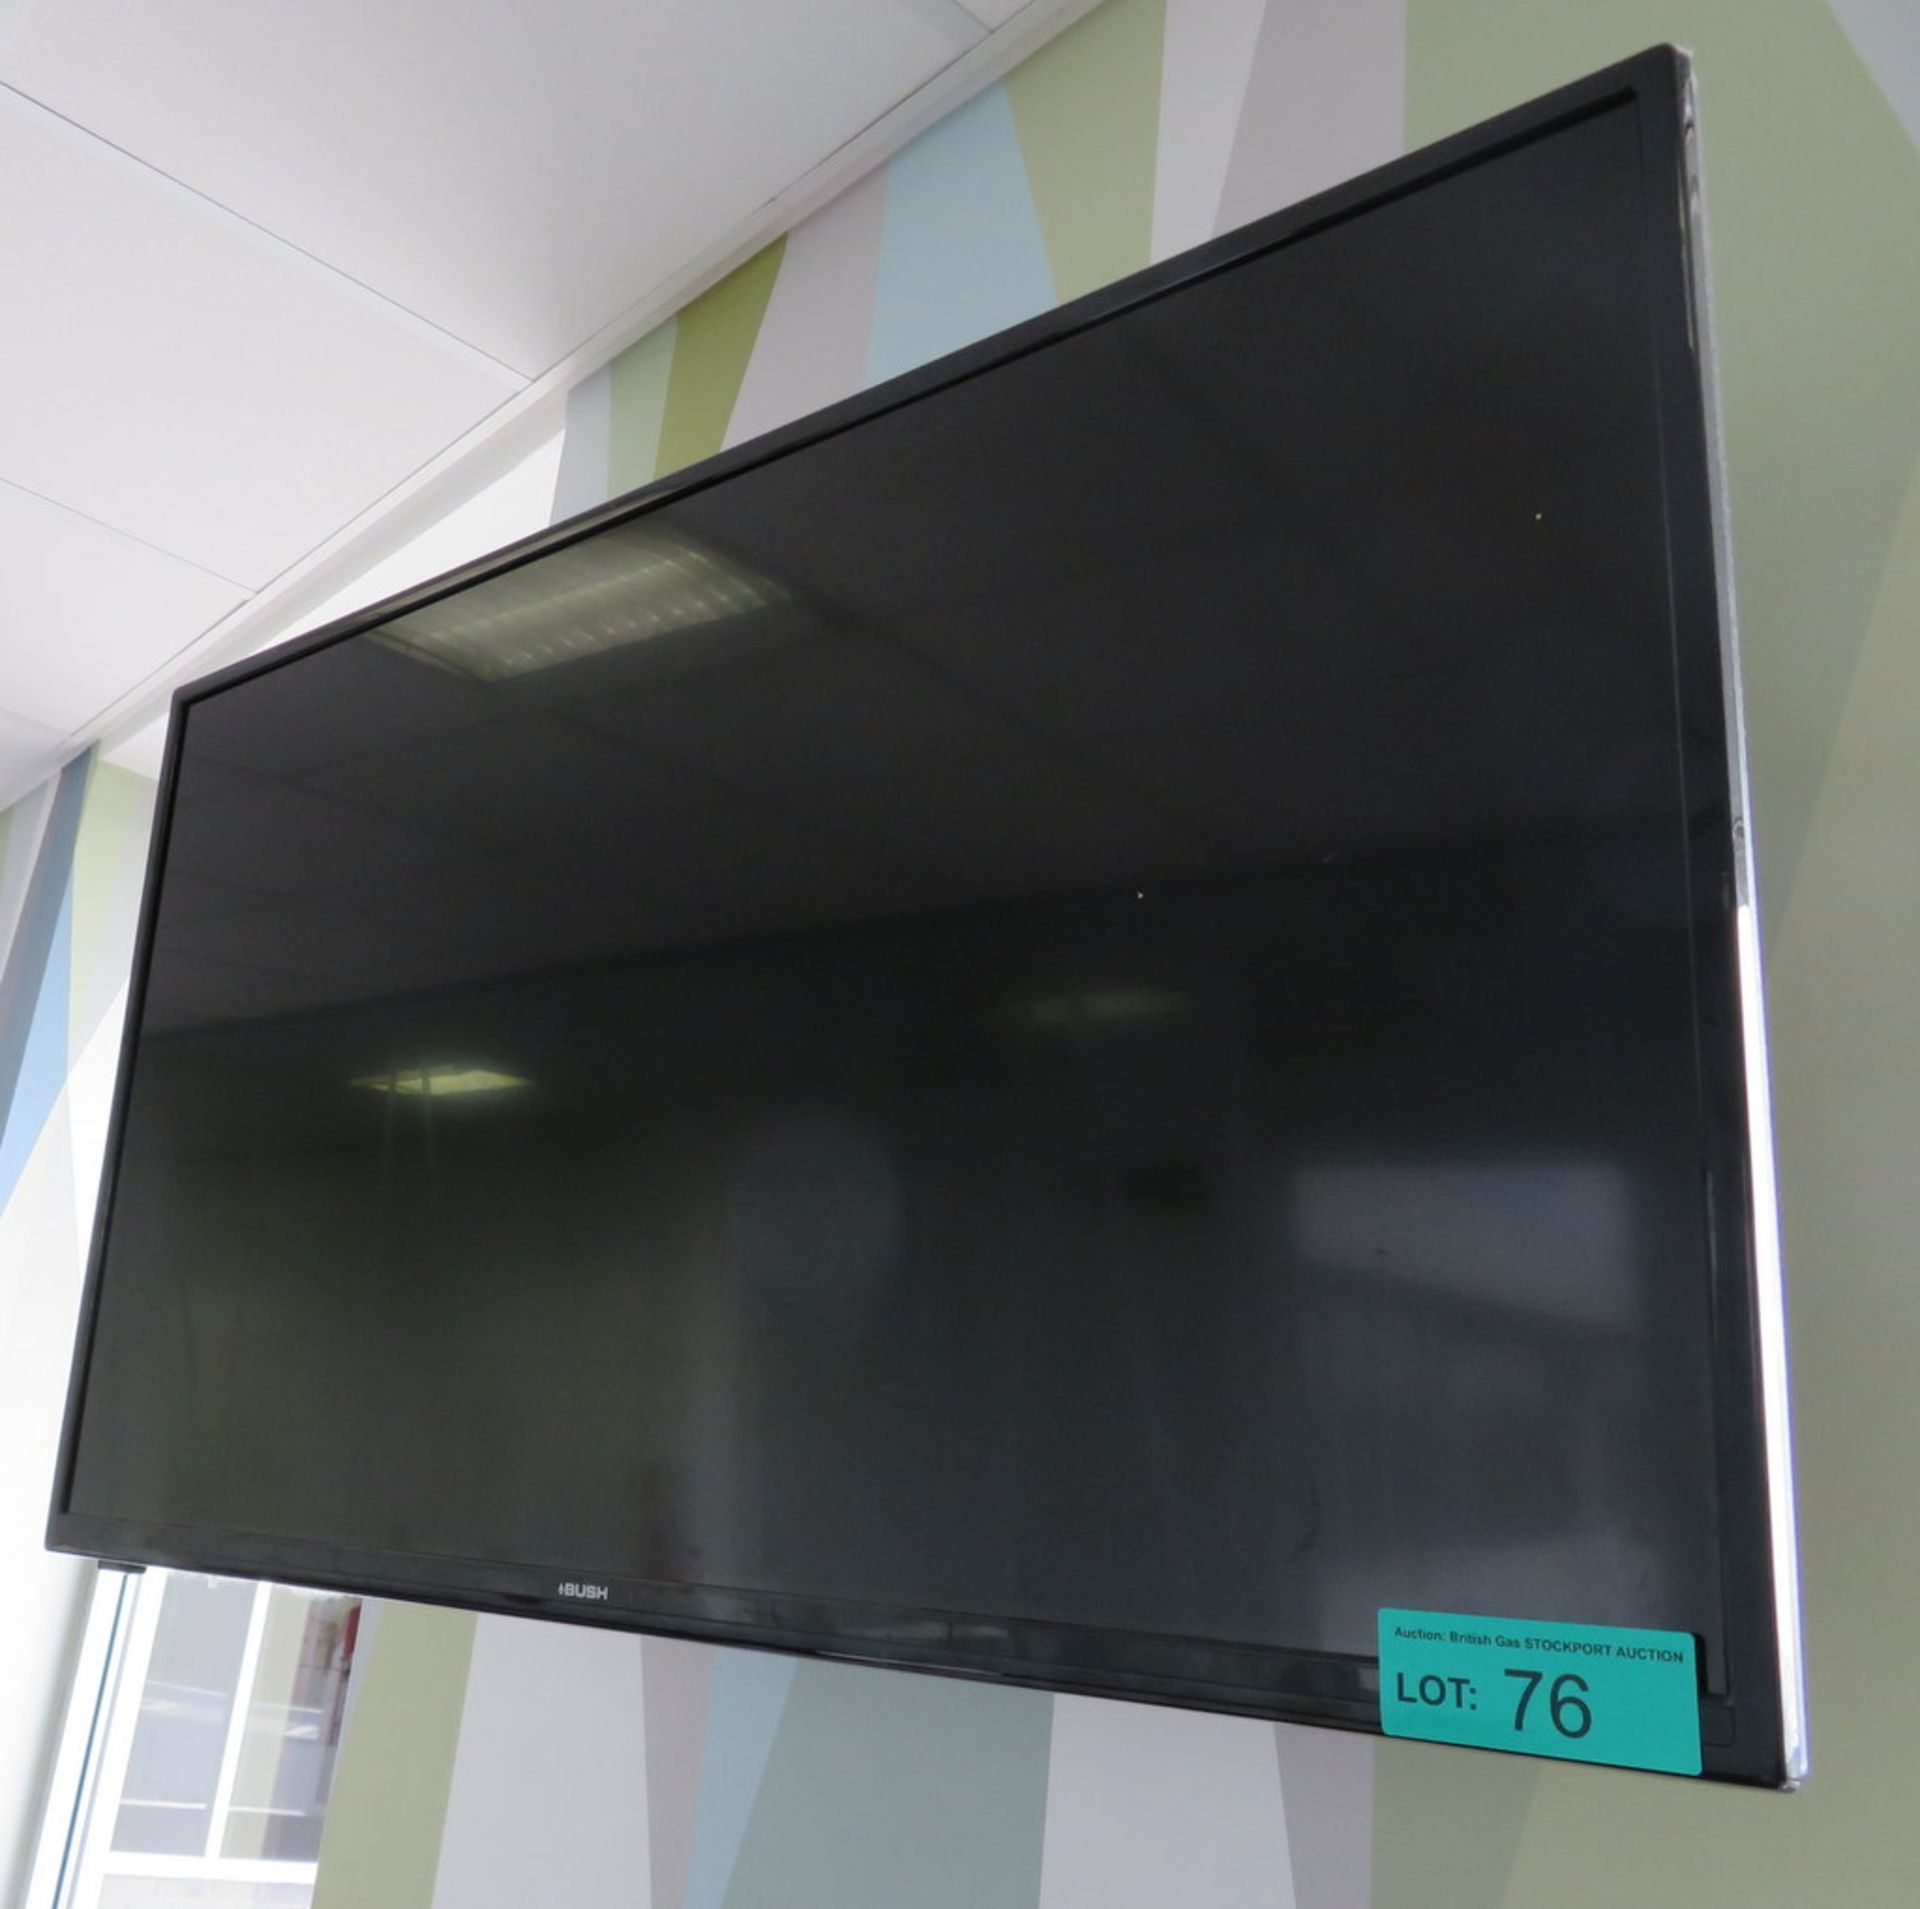 BUSH LED40127FH 40" TV. Please Note There Is No Stand And The Wall Mount Is Not Included. - Image 2 of 4